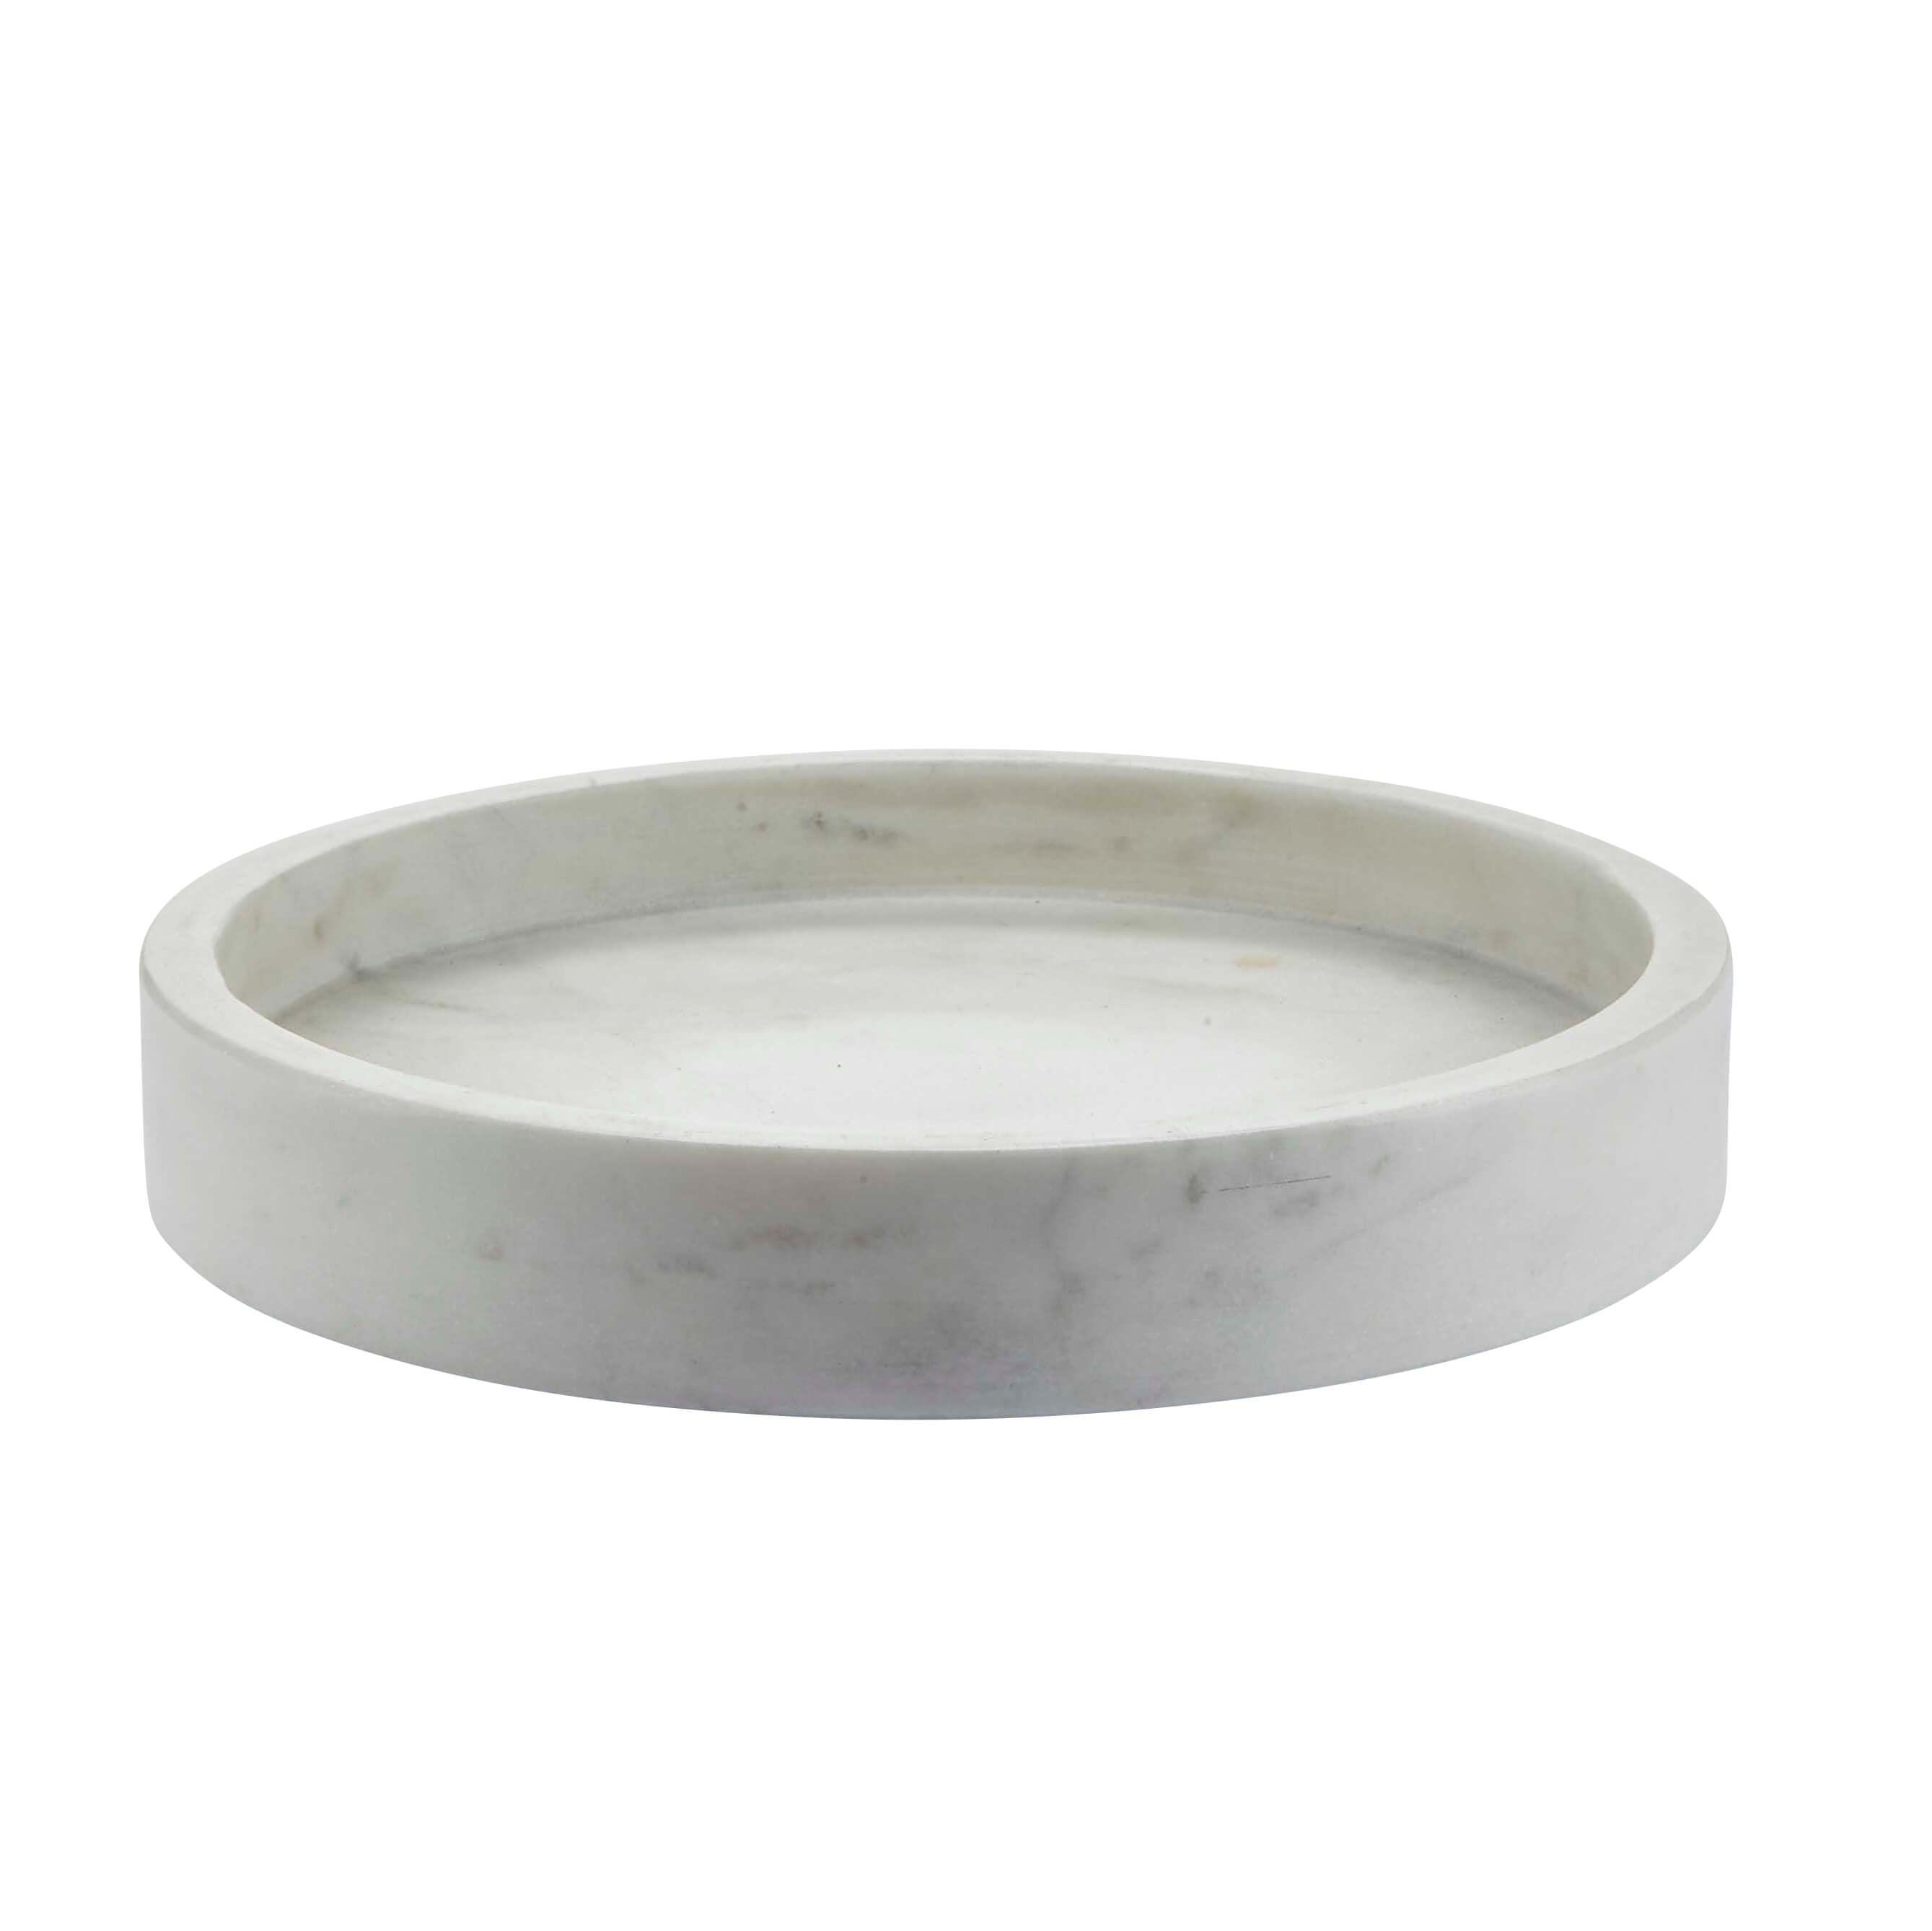 bahne-white-marble-round-tray